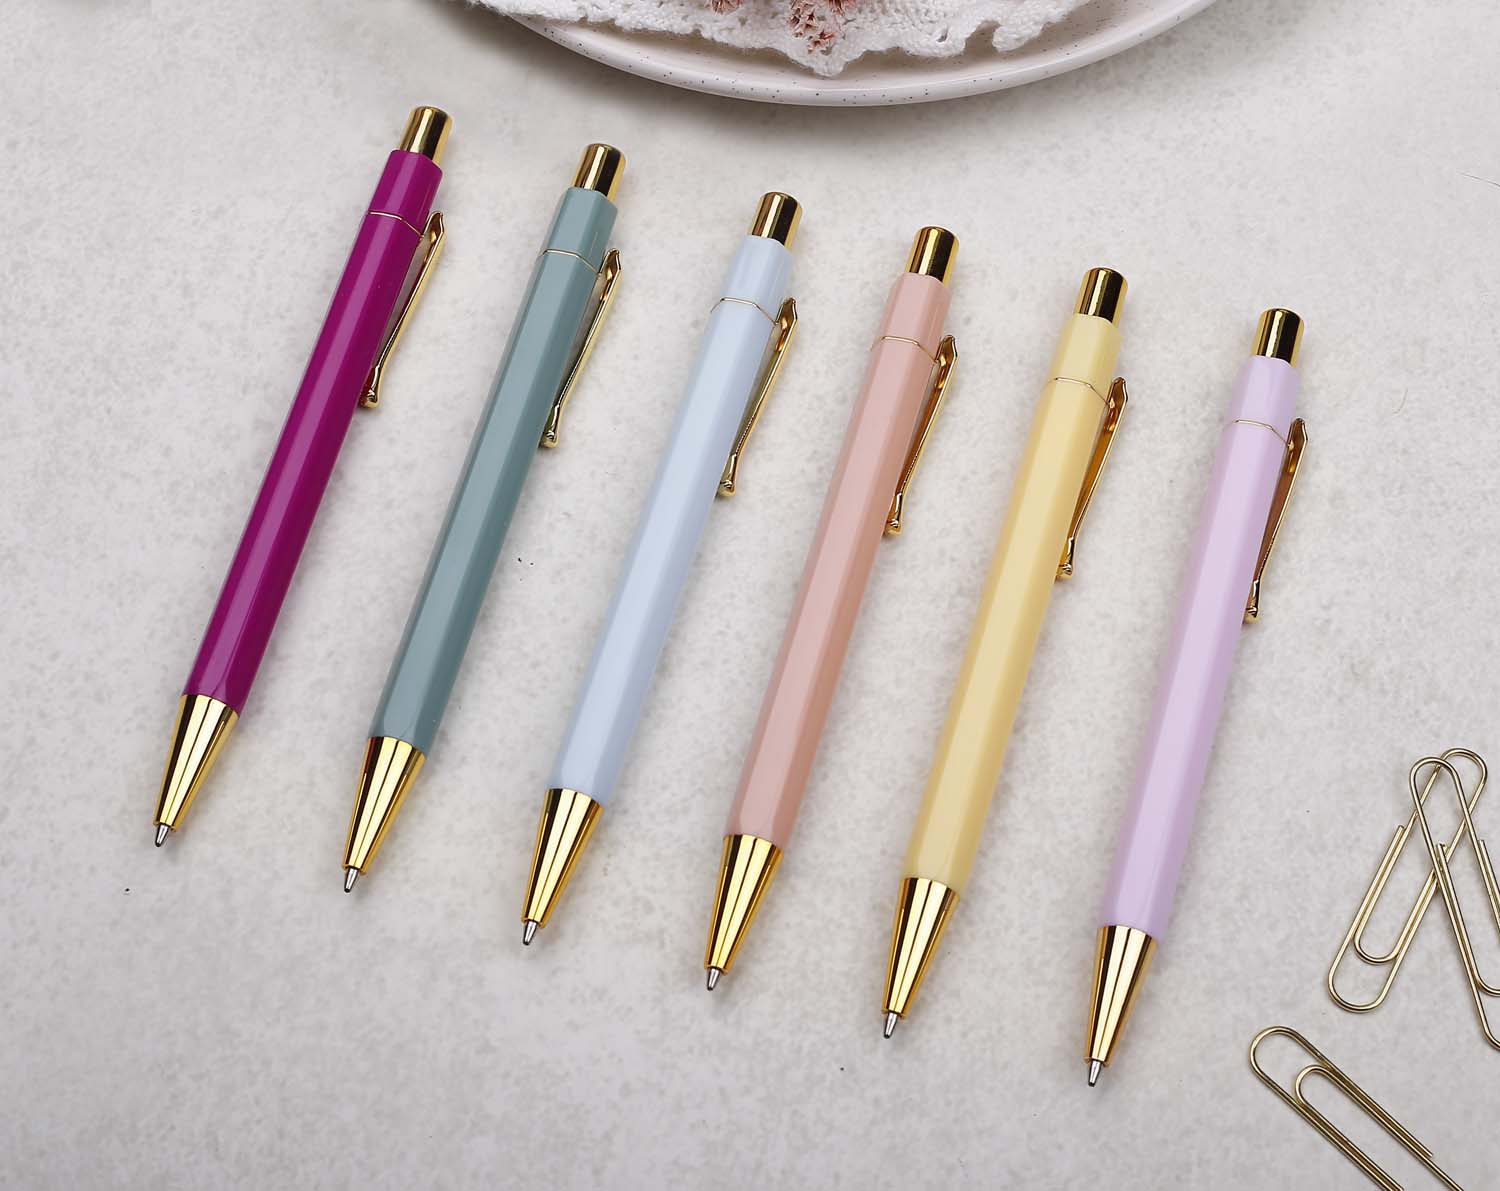 A premium peach and gold pen with ballpoint tip and hexagonal barrel detail